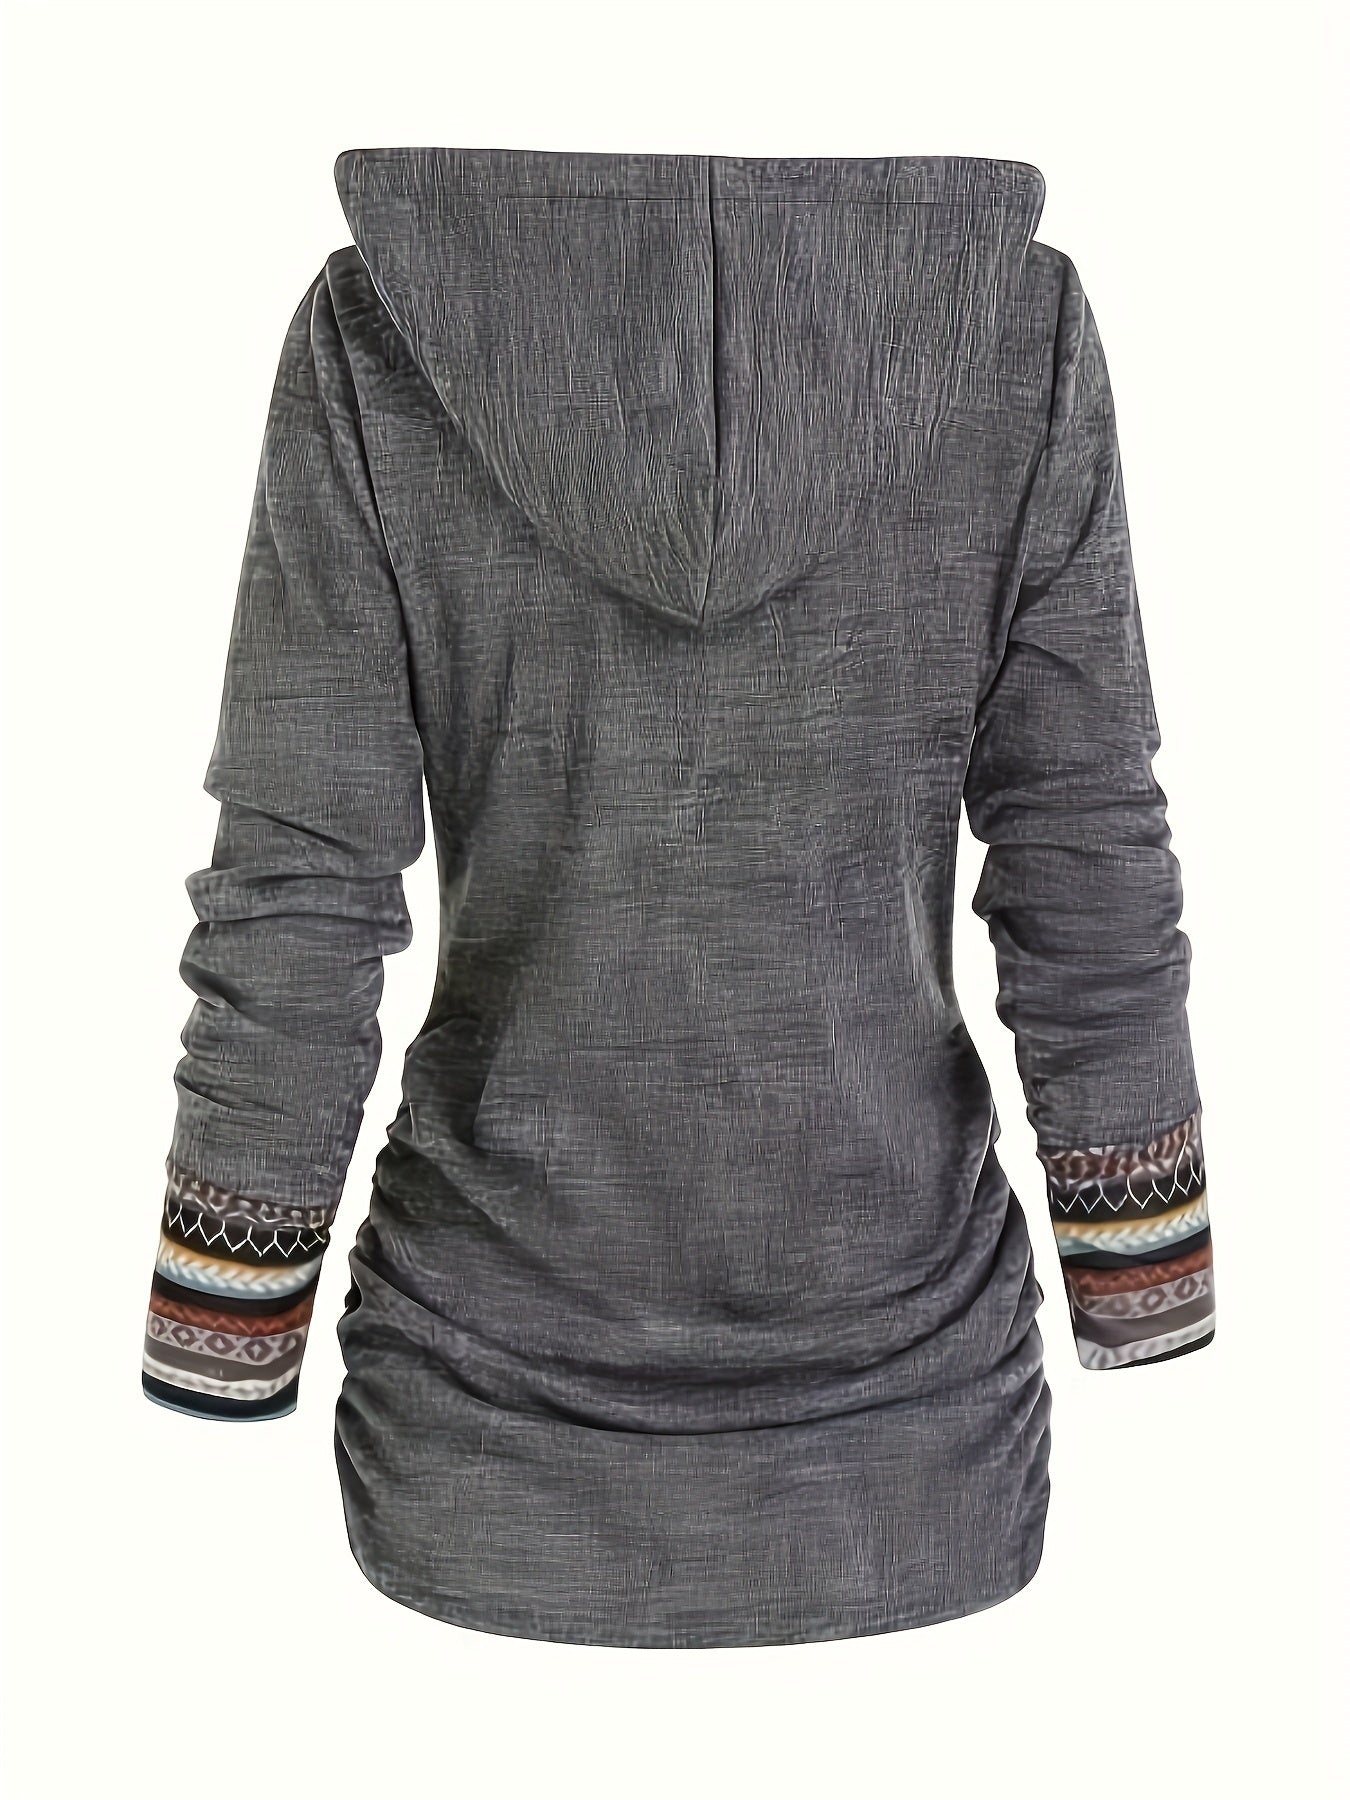 Gray long-sleeve hoodie with a textured pattern, made from polyester and perfect for a casual look, featuring multicolored geometric designs on the cuffs. View from the back.

Plus Size Retro Top, Women's Plus Colorblock Geometric Print Hooded Long Sleeve Button Decor Slim Fit Slight Stretch Top by Maramalive™.